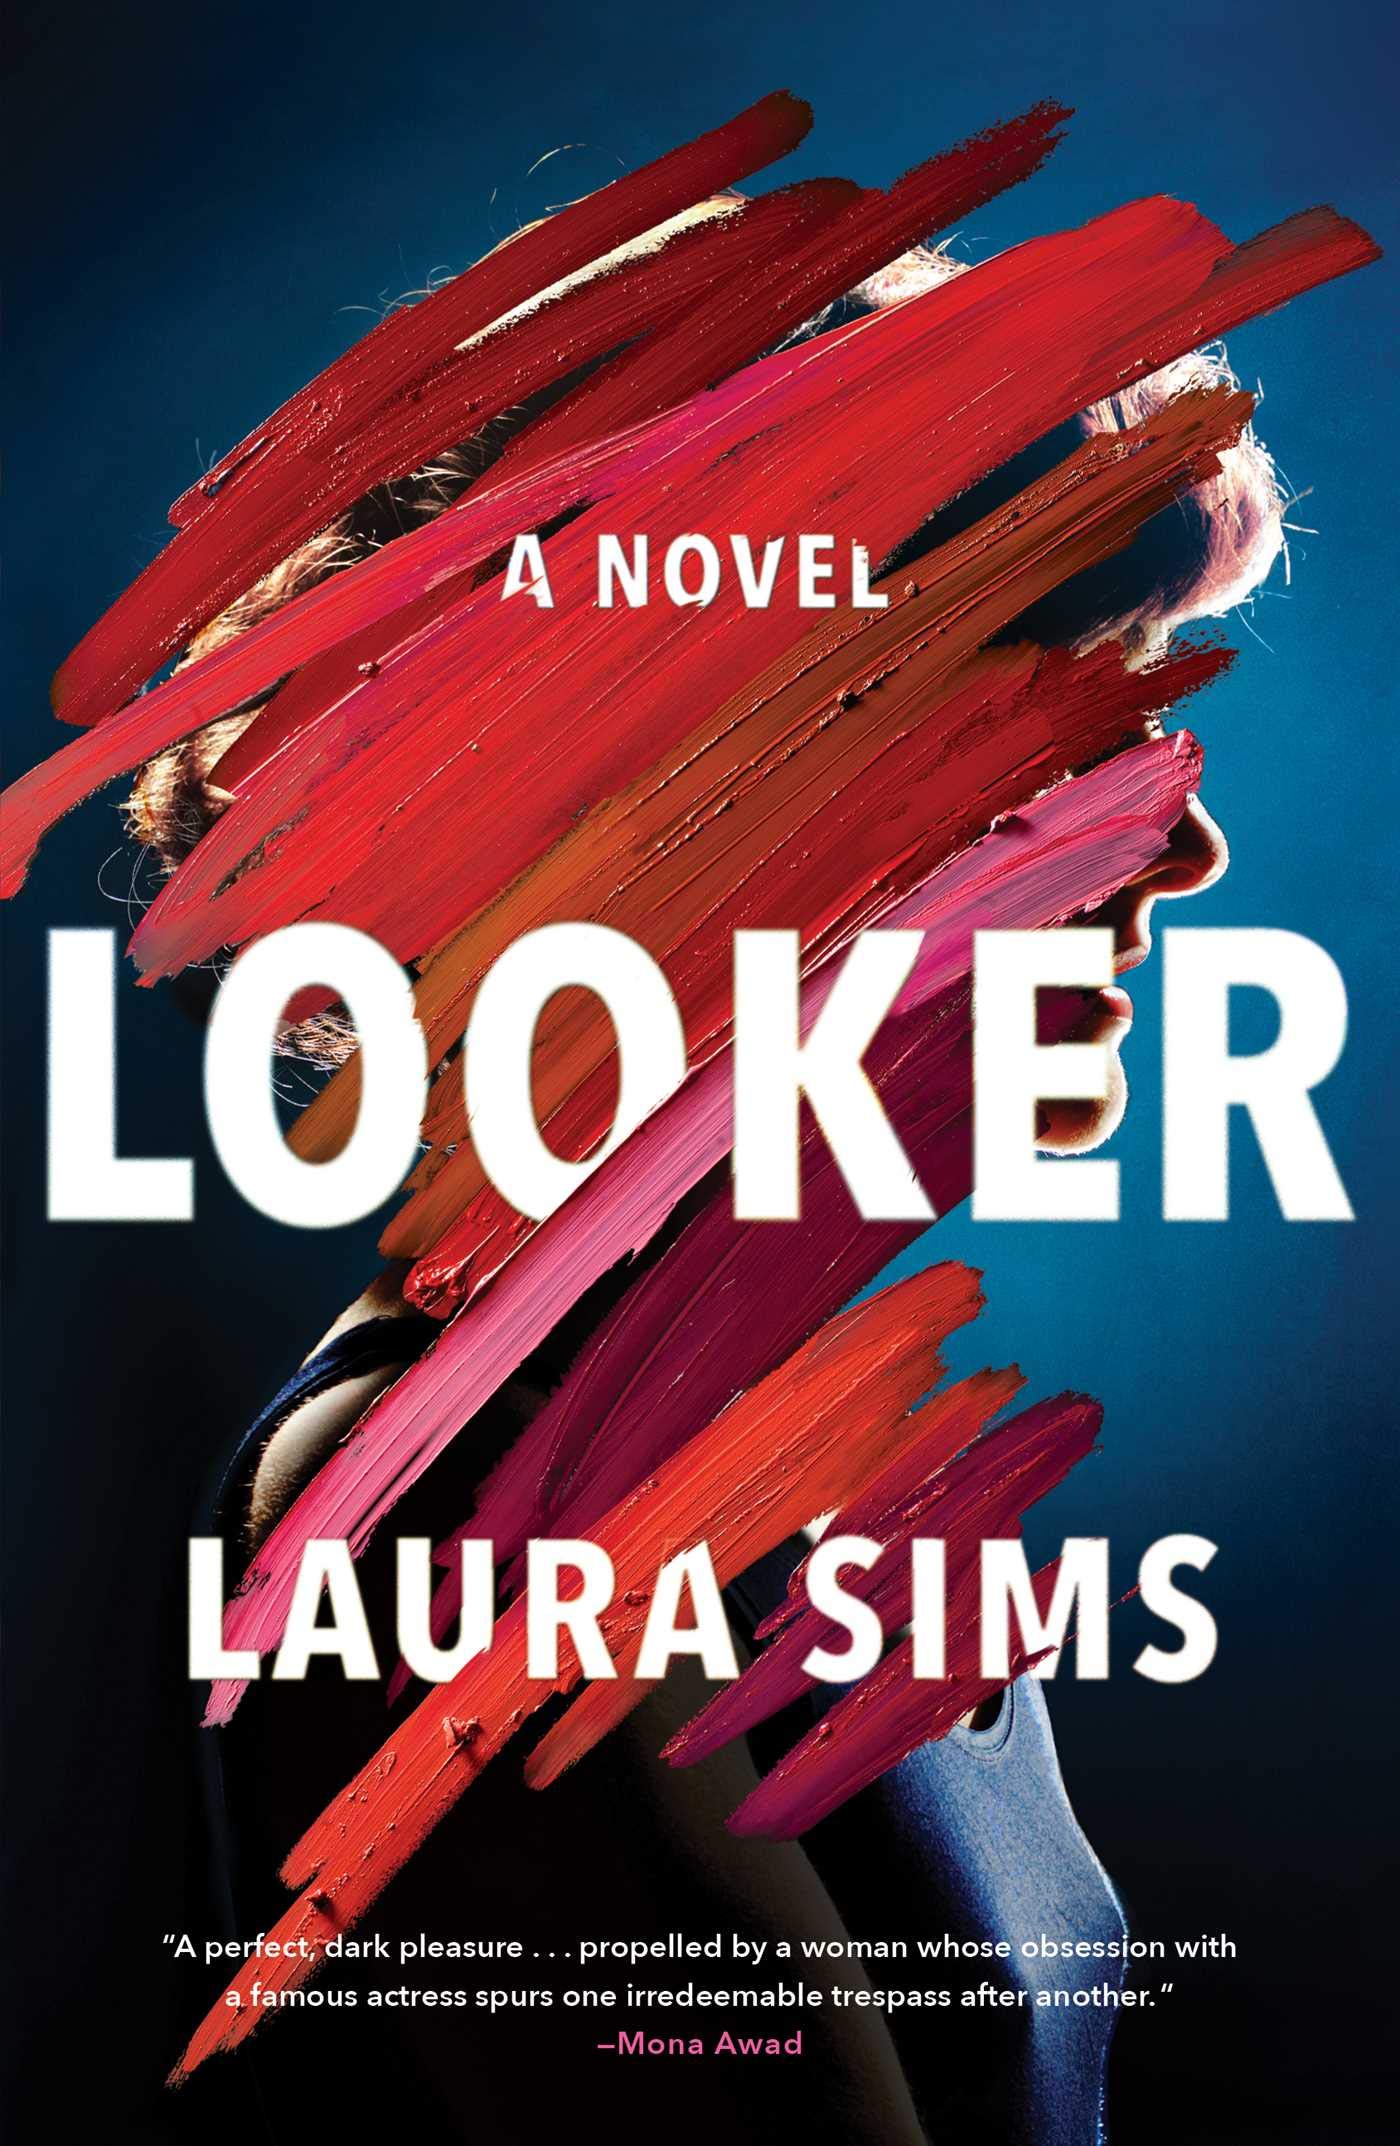 Image for "Looker"